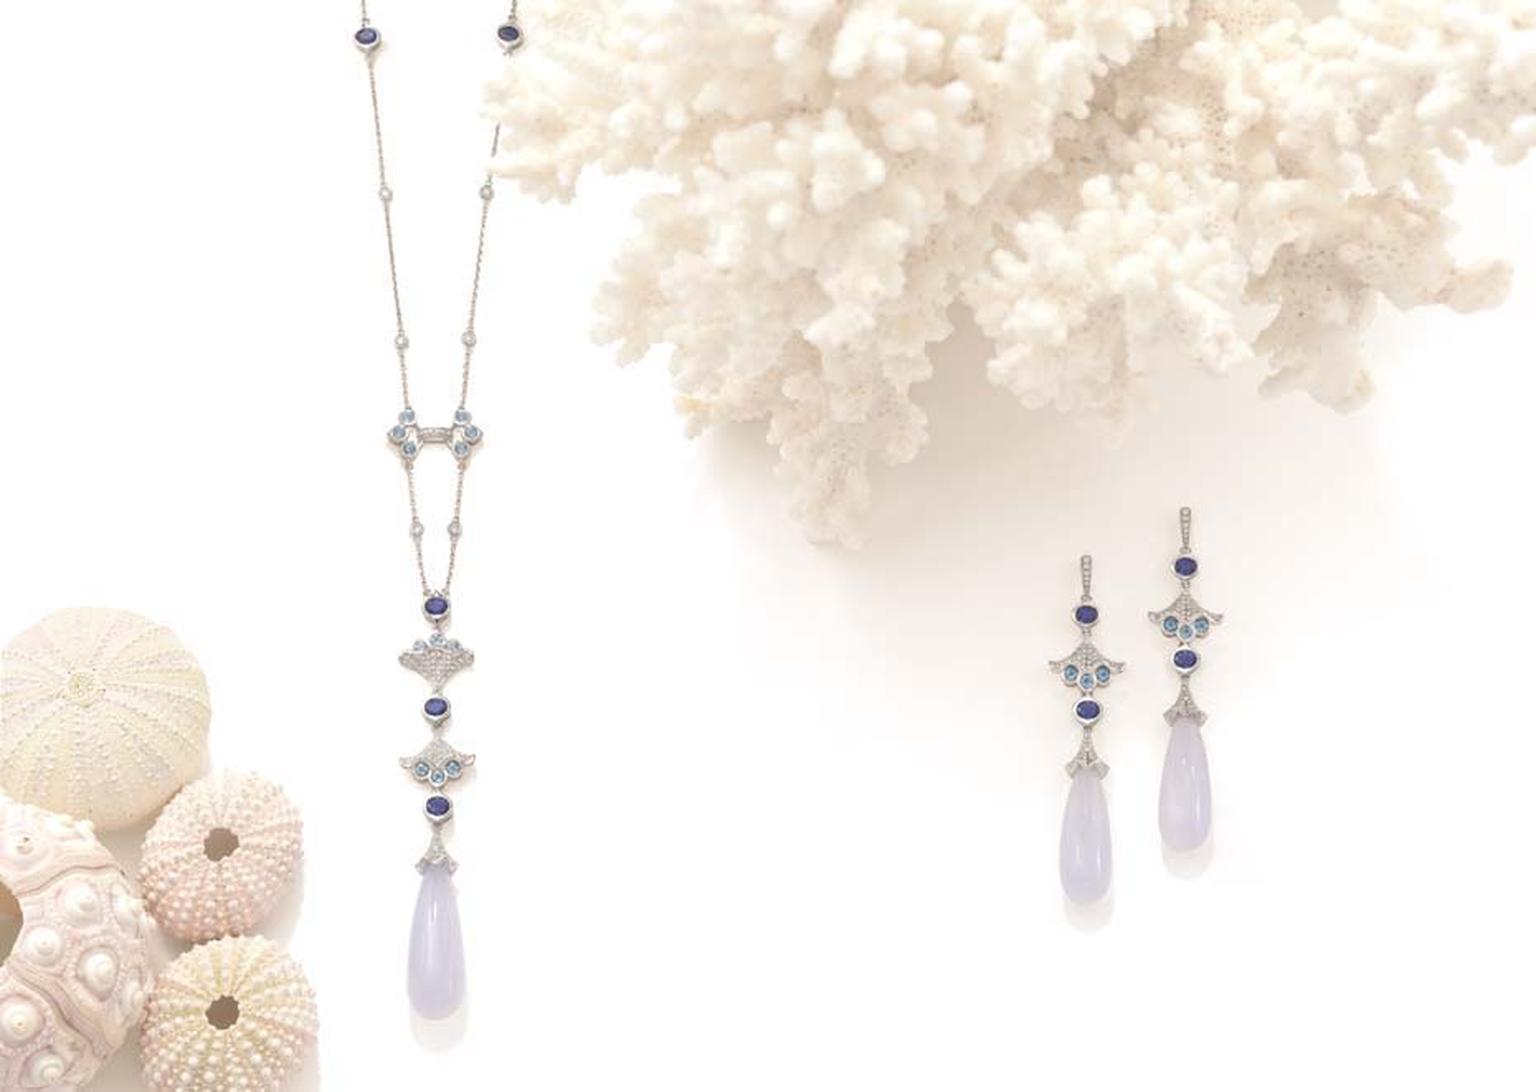 Boodles Ocean Moon necklace and earrings with chalcedony, tanzanites and diamonds, from the new 'Ocean of Dreams' collection.